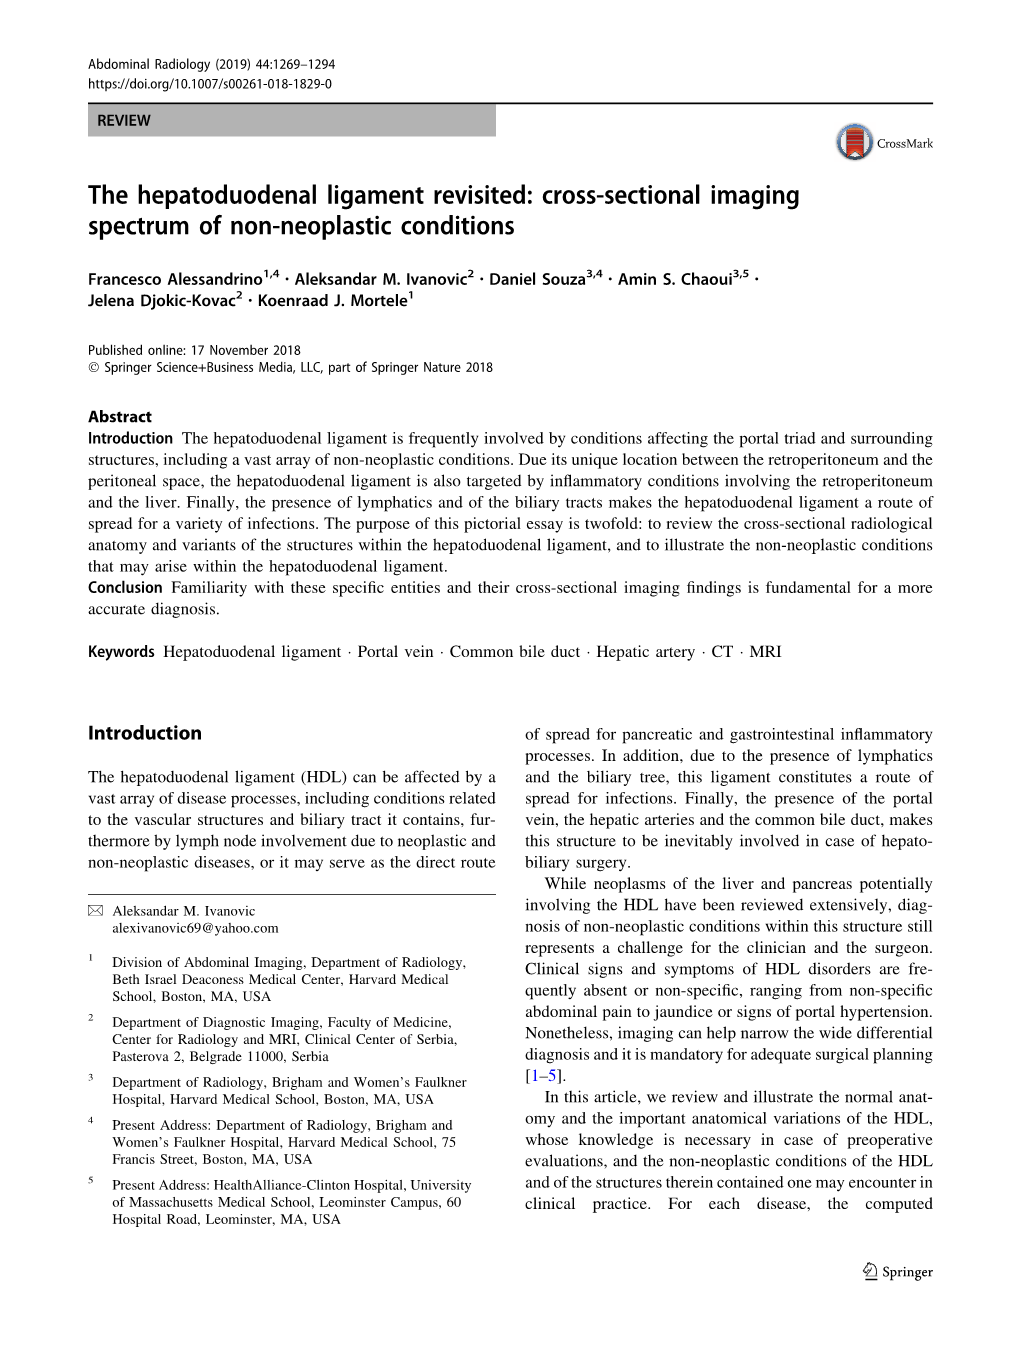 The Hepatoduodenal Ligament Revisited: Cross-Sectional Imaging Spectrum of Non-Neoplastic Conditions